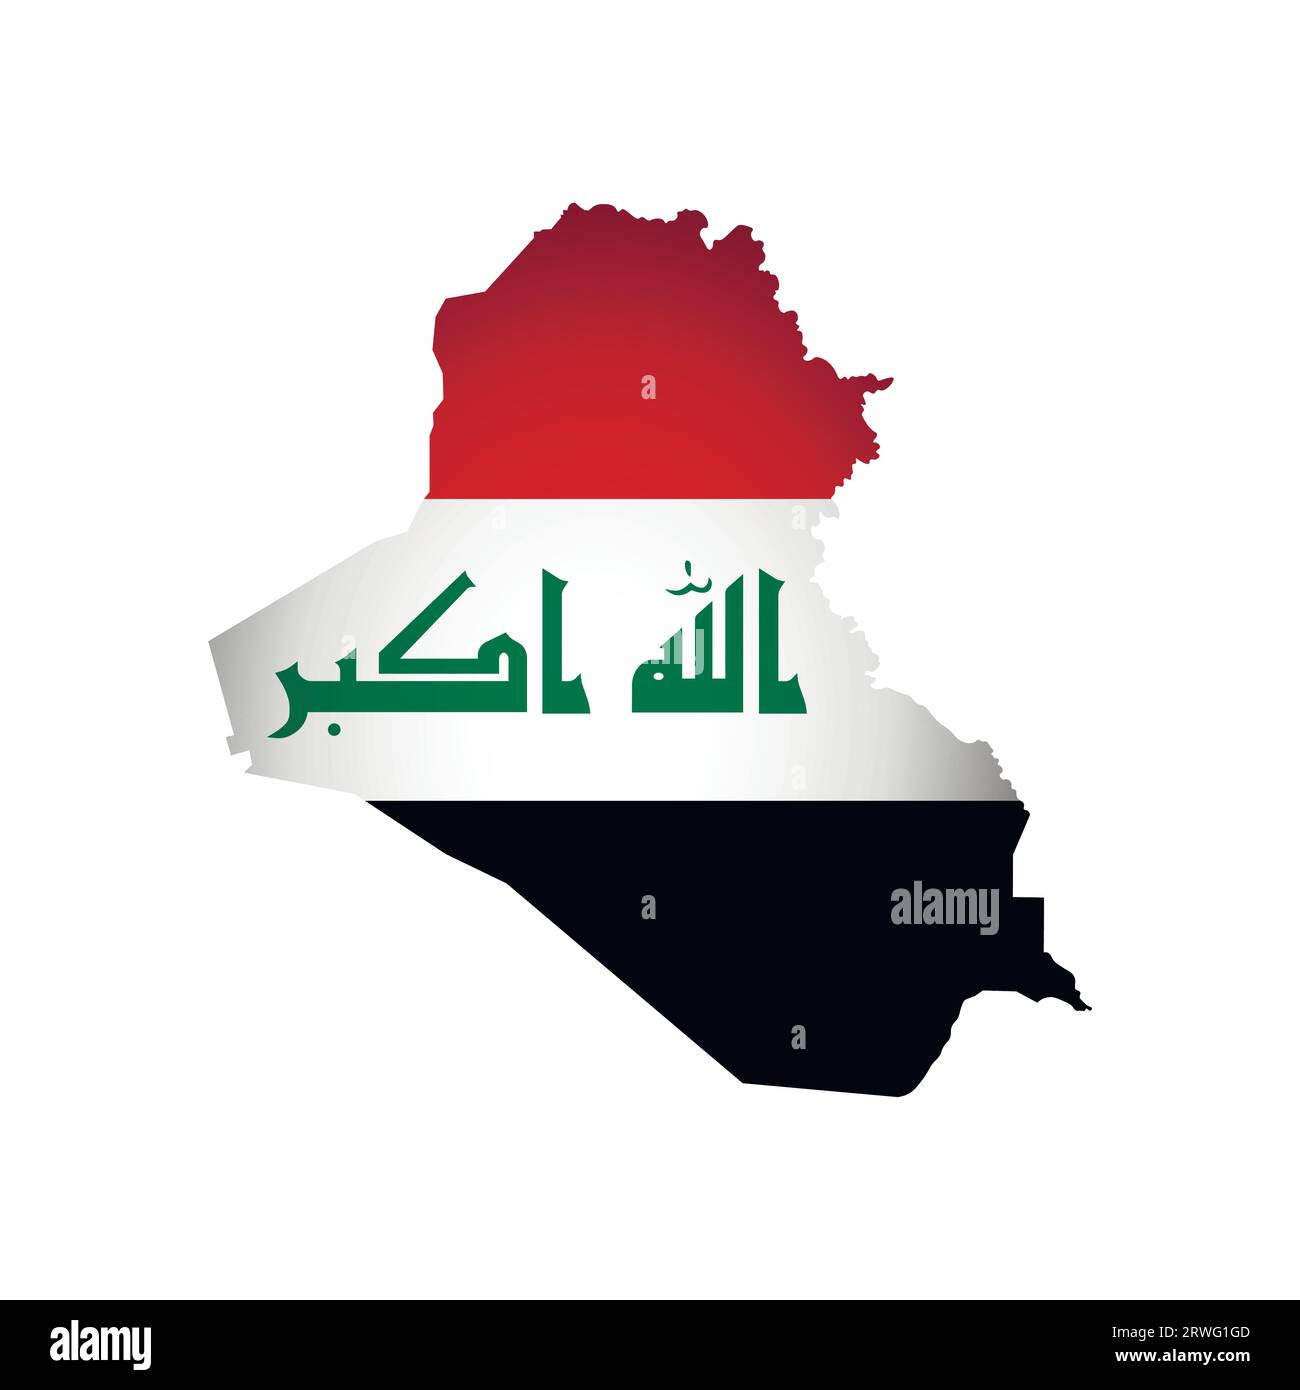 Vector illustration with national flag and map (simplified shape) of Republic of Iraq. Volume shadow on the map. Stock Vector